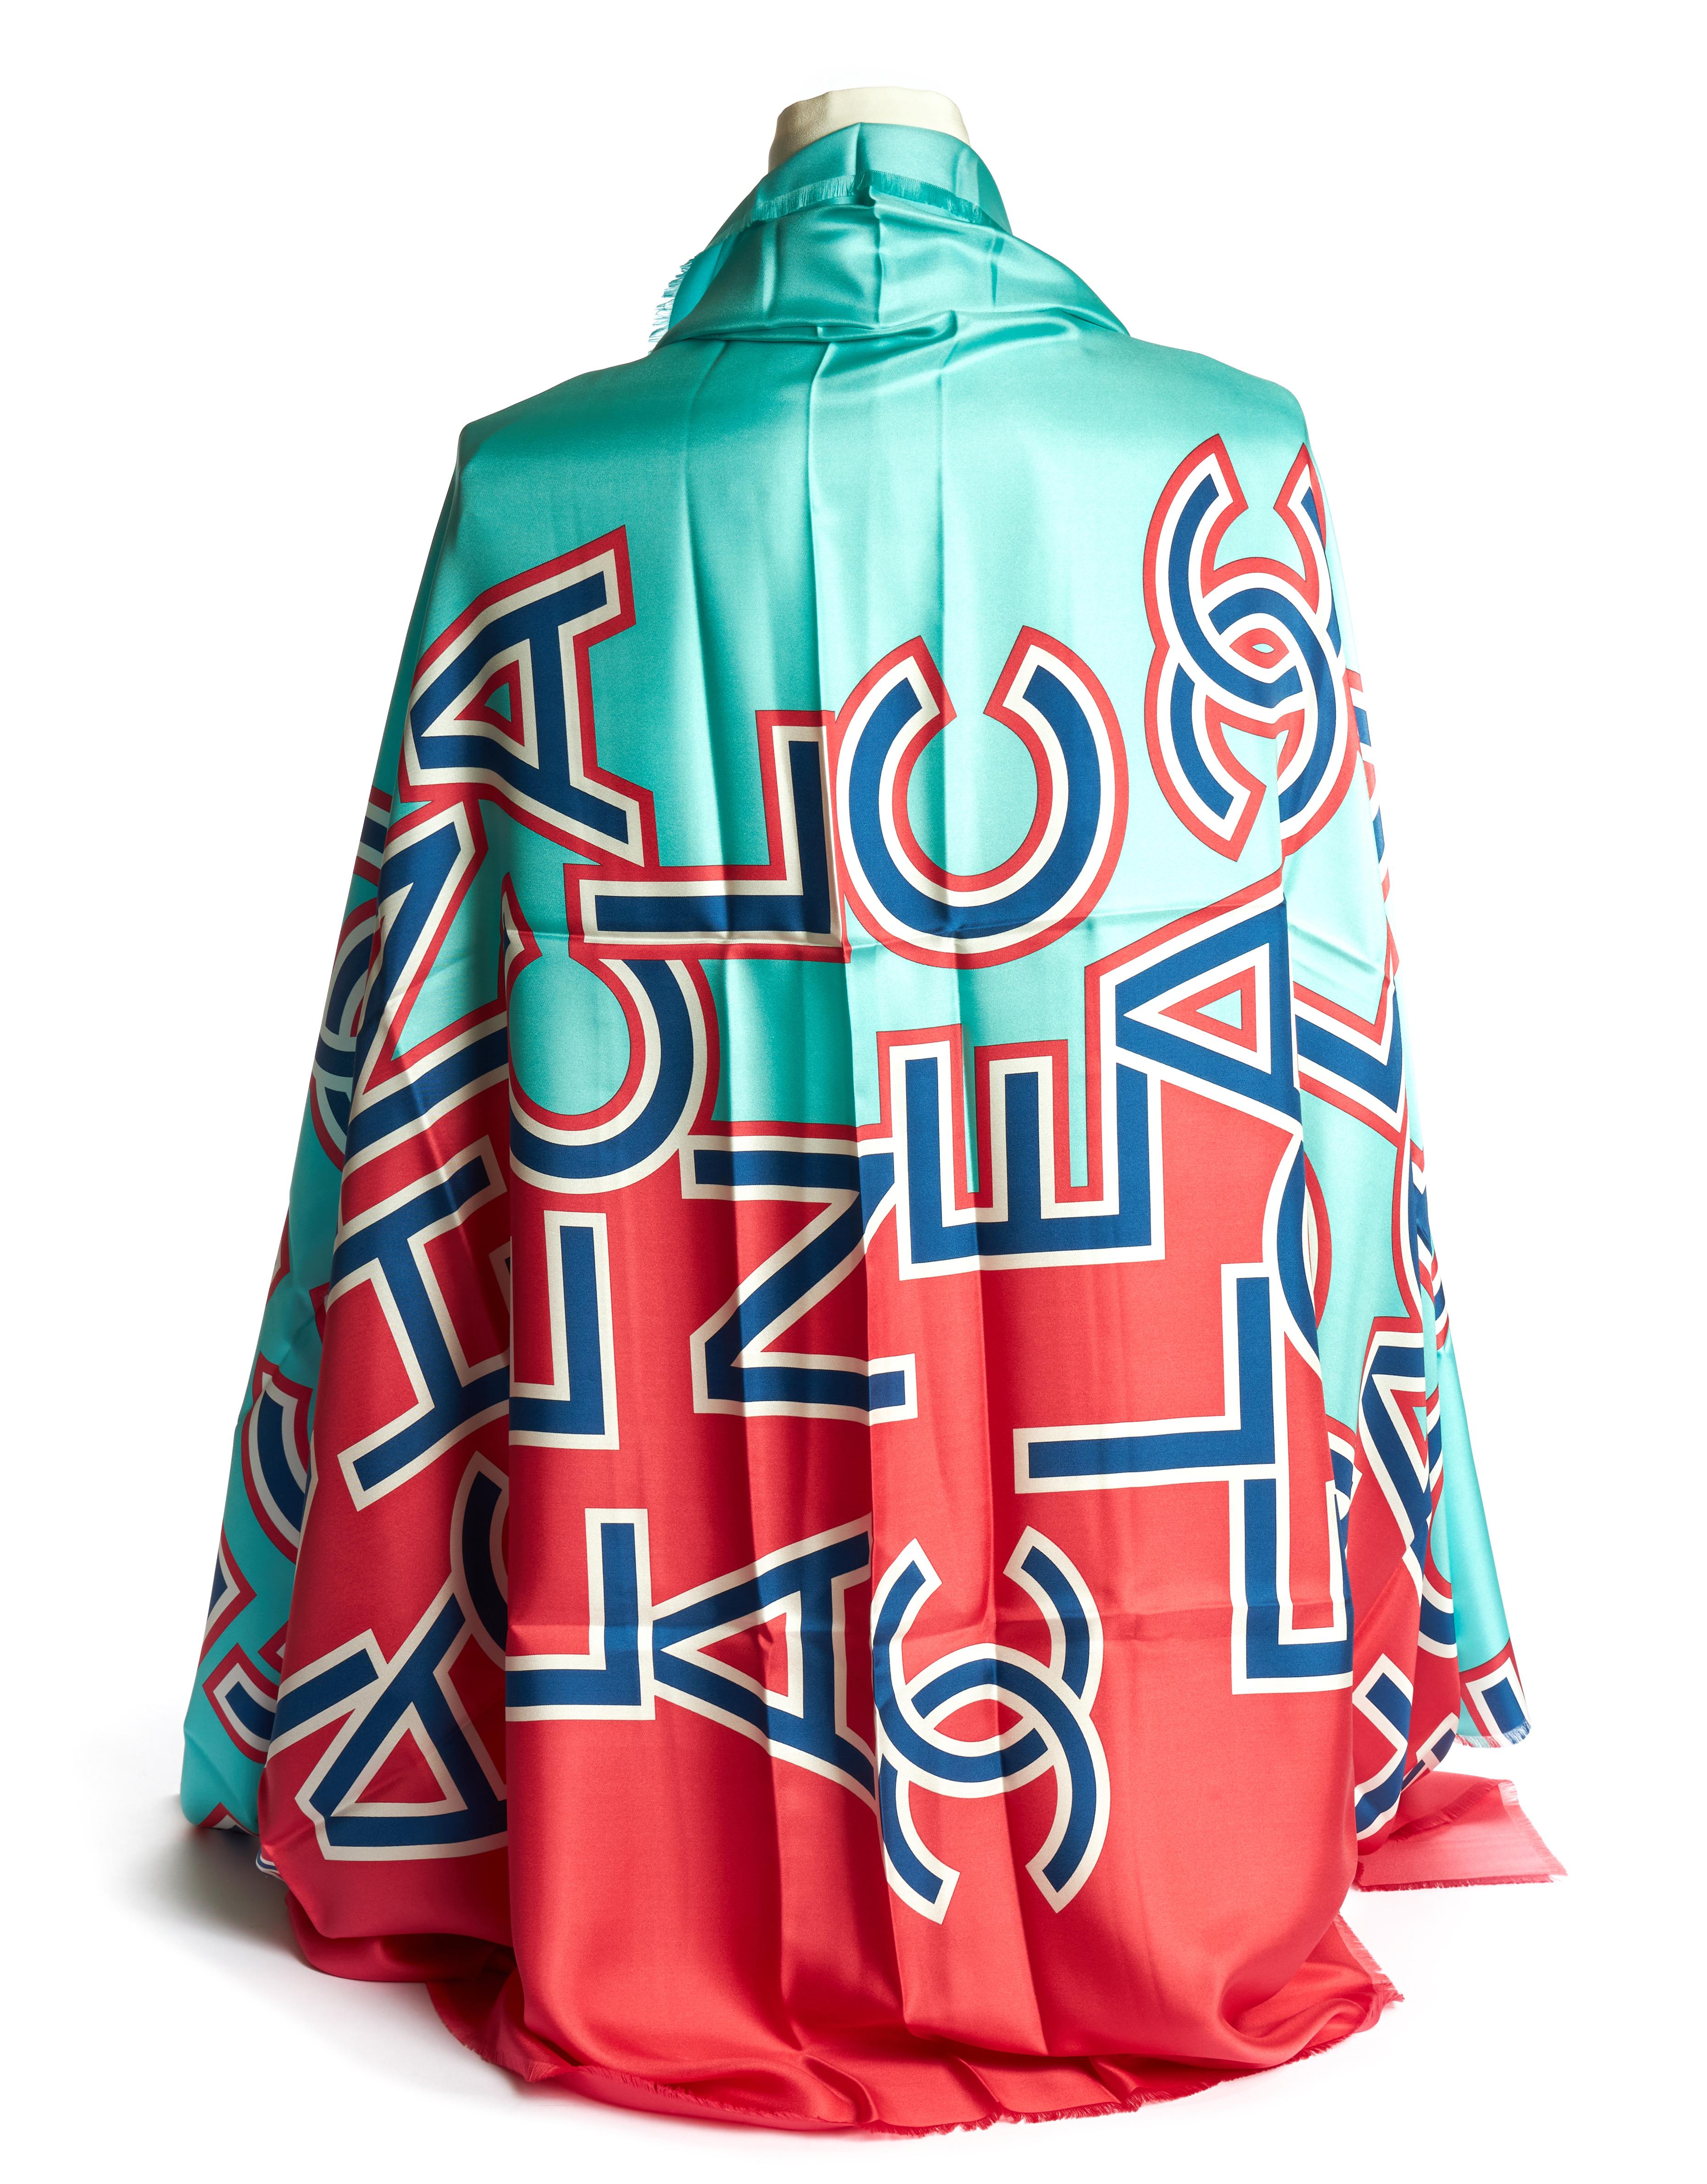 Chanel brand new in unworn condition oversize teal and coral scrambled letters shawl. 100% silk. Original care tag.